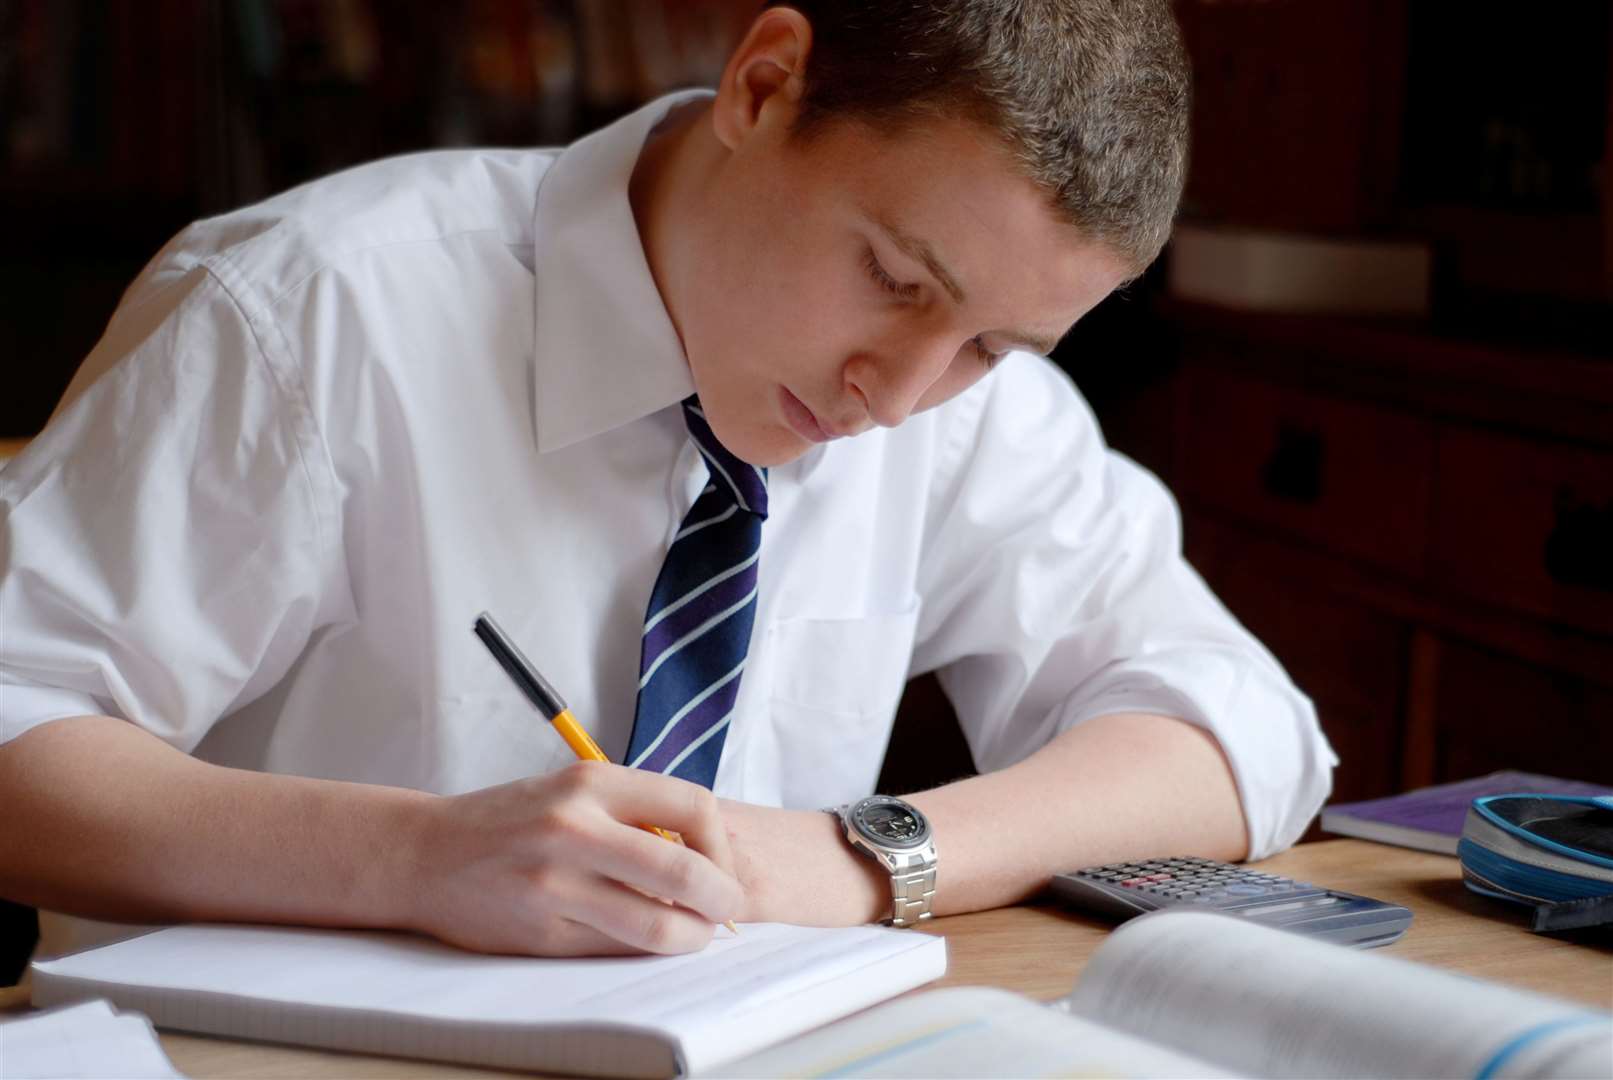 GCSE and A level exams begin in May. Image: iStock.